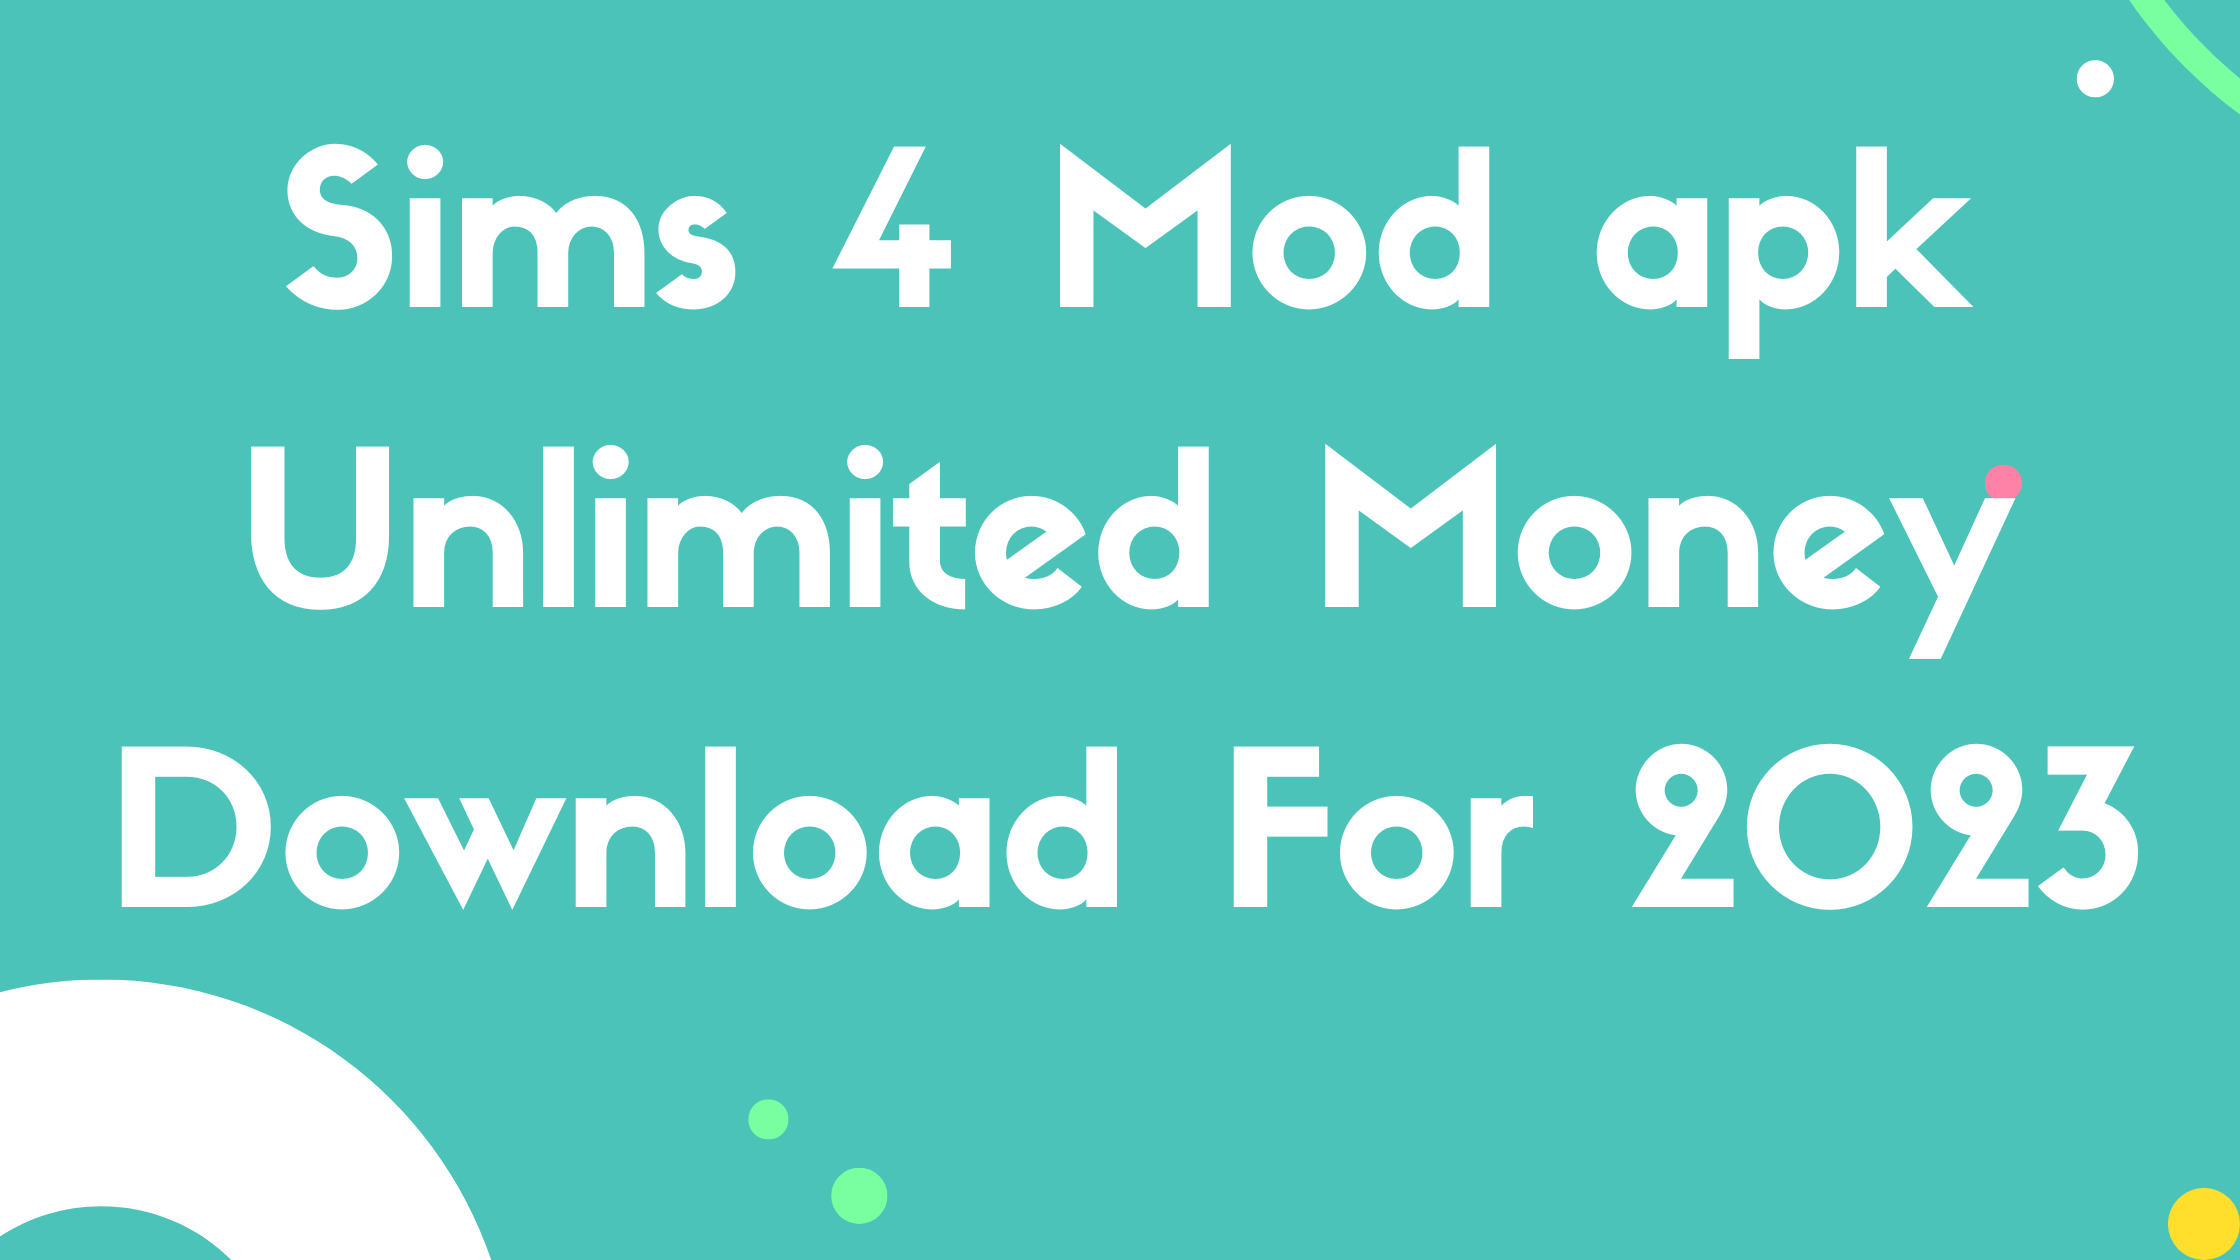 Sims 4 Mod apk Unlimited Money Download For 2023